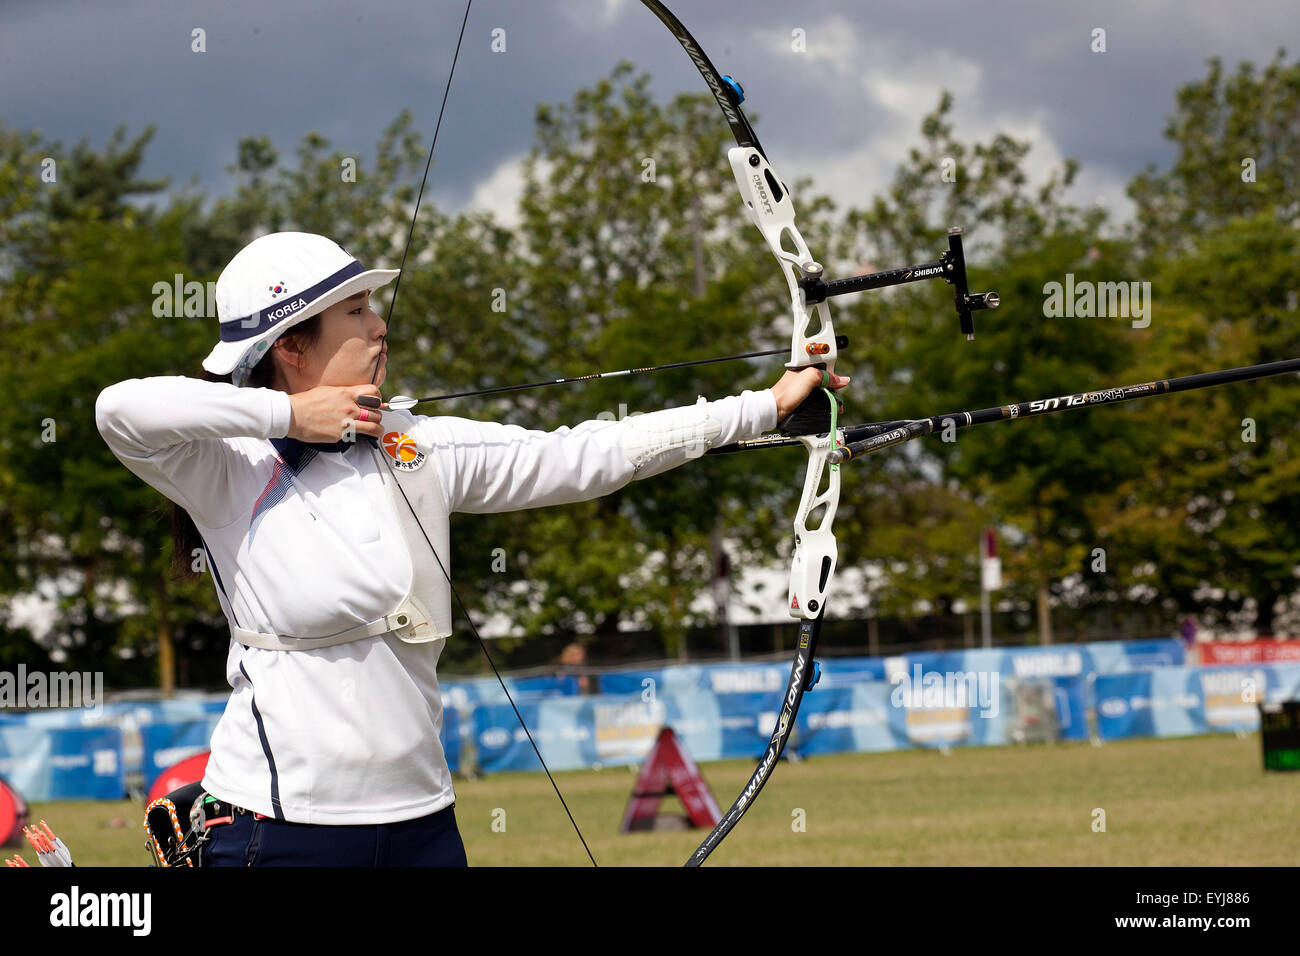 Copenhagen, Denmark, July 30th, 2015: Korean archers Misun Choi  competes in the World Archery Championships in Copenhagen during Thursday's individual matches  in recurve bow. Credit:  OJPHOTOS/Alamy Live News Stock Photo